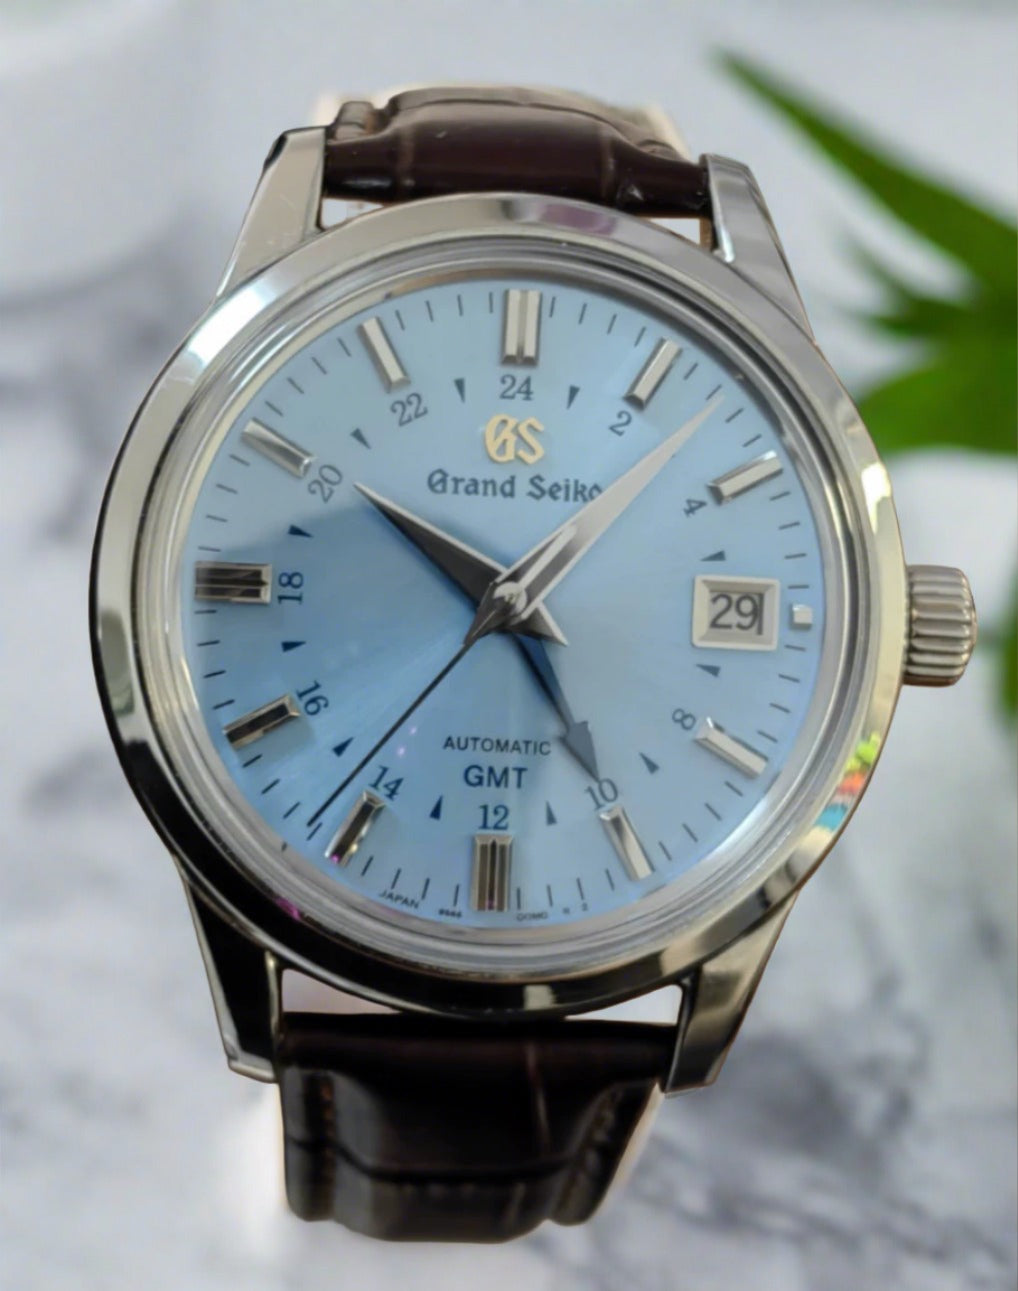 40mm ice blue Dial Grand Seiko GMT Nh34 mod Automatic Watch